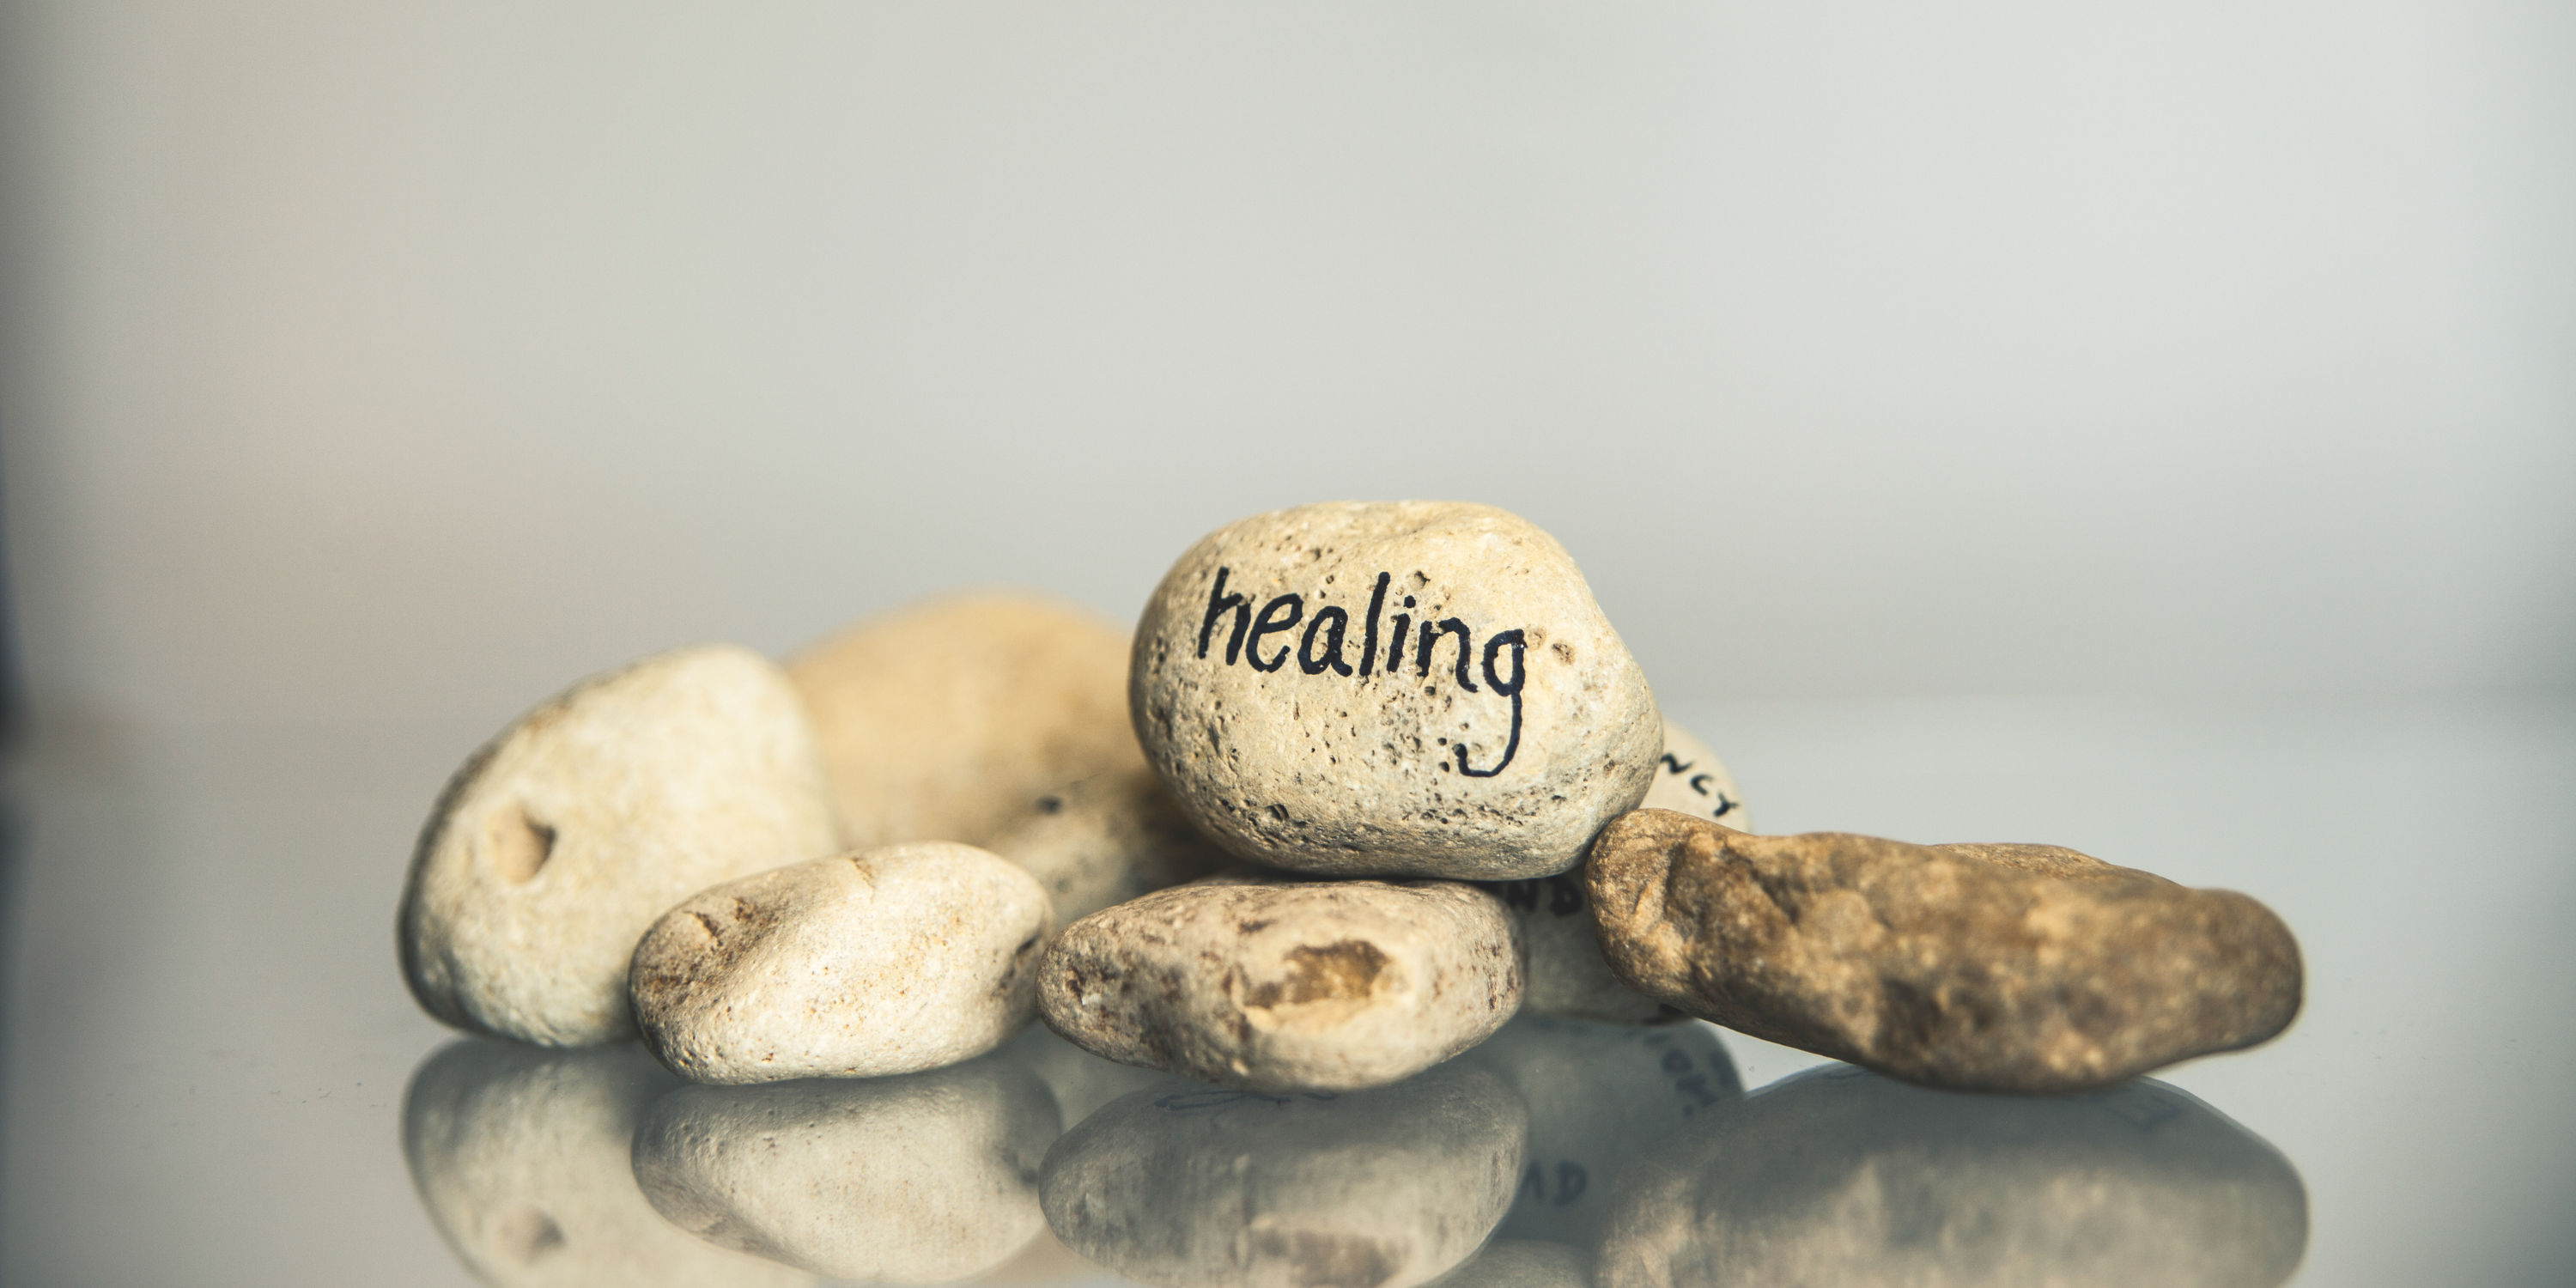 Small rocks resting on a table, with one rock reading "healing" in black ink.